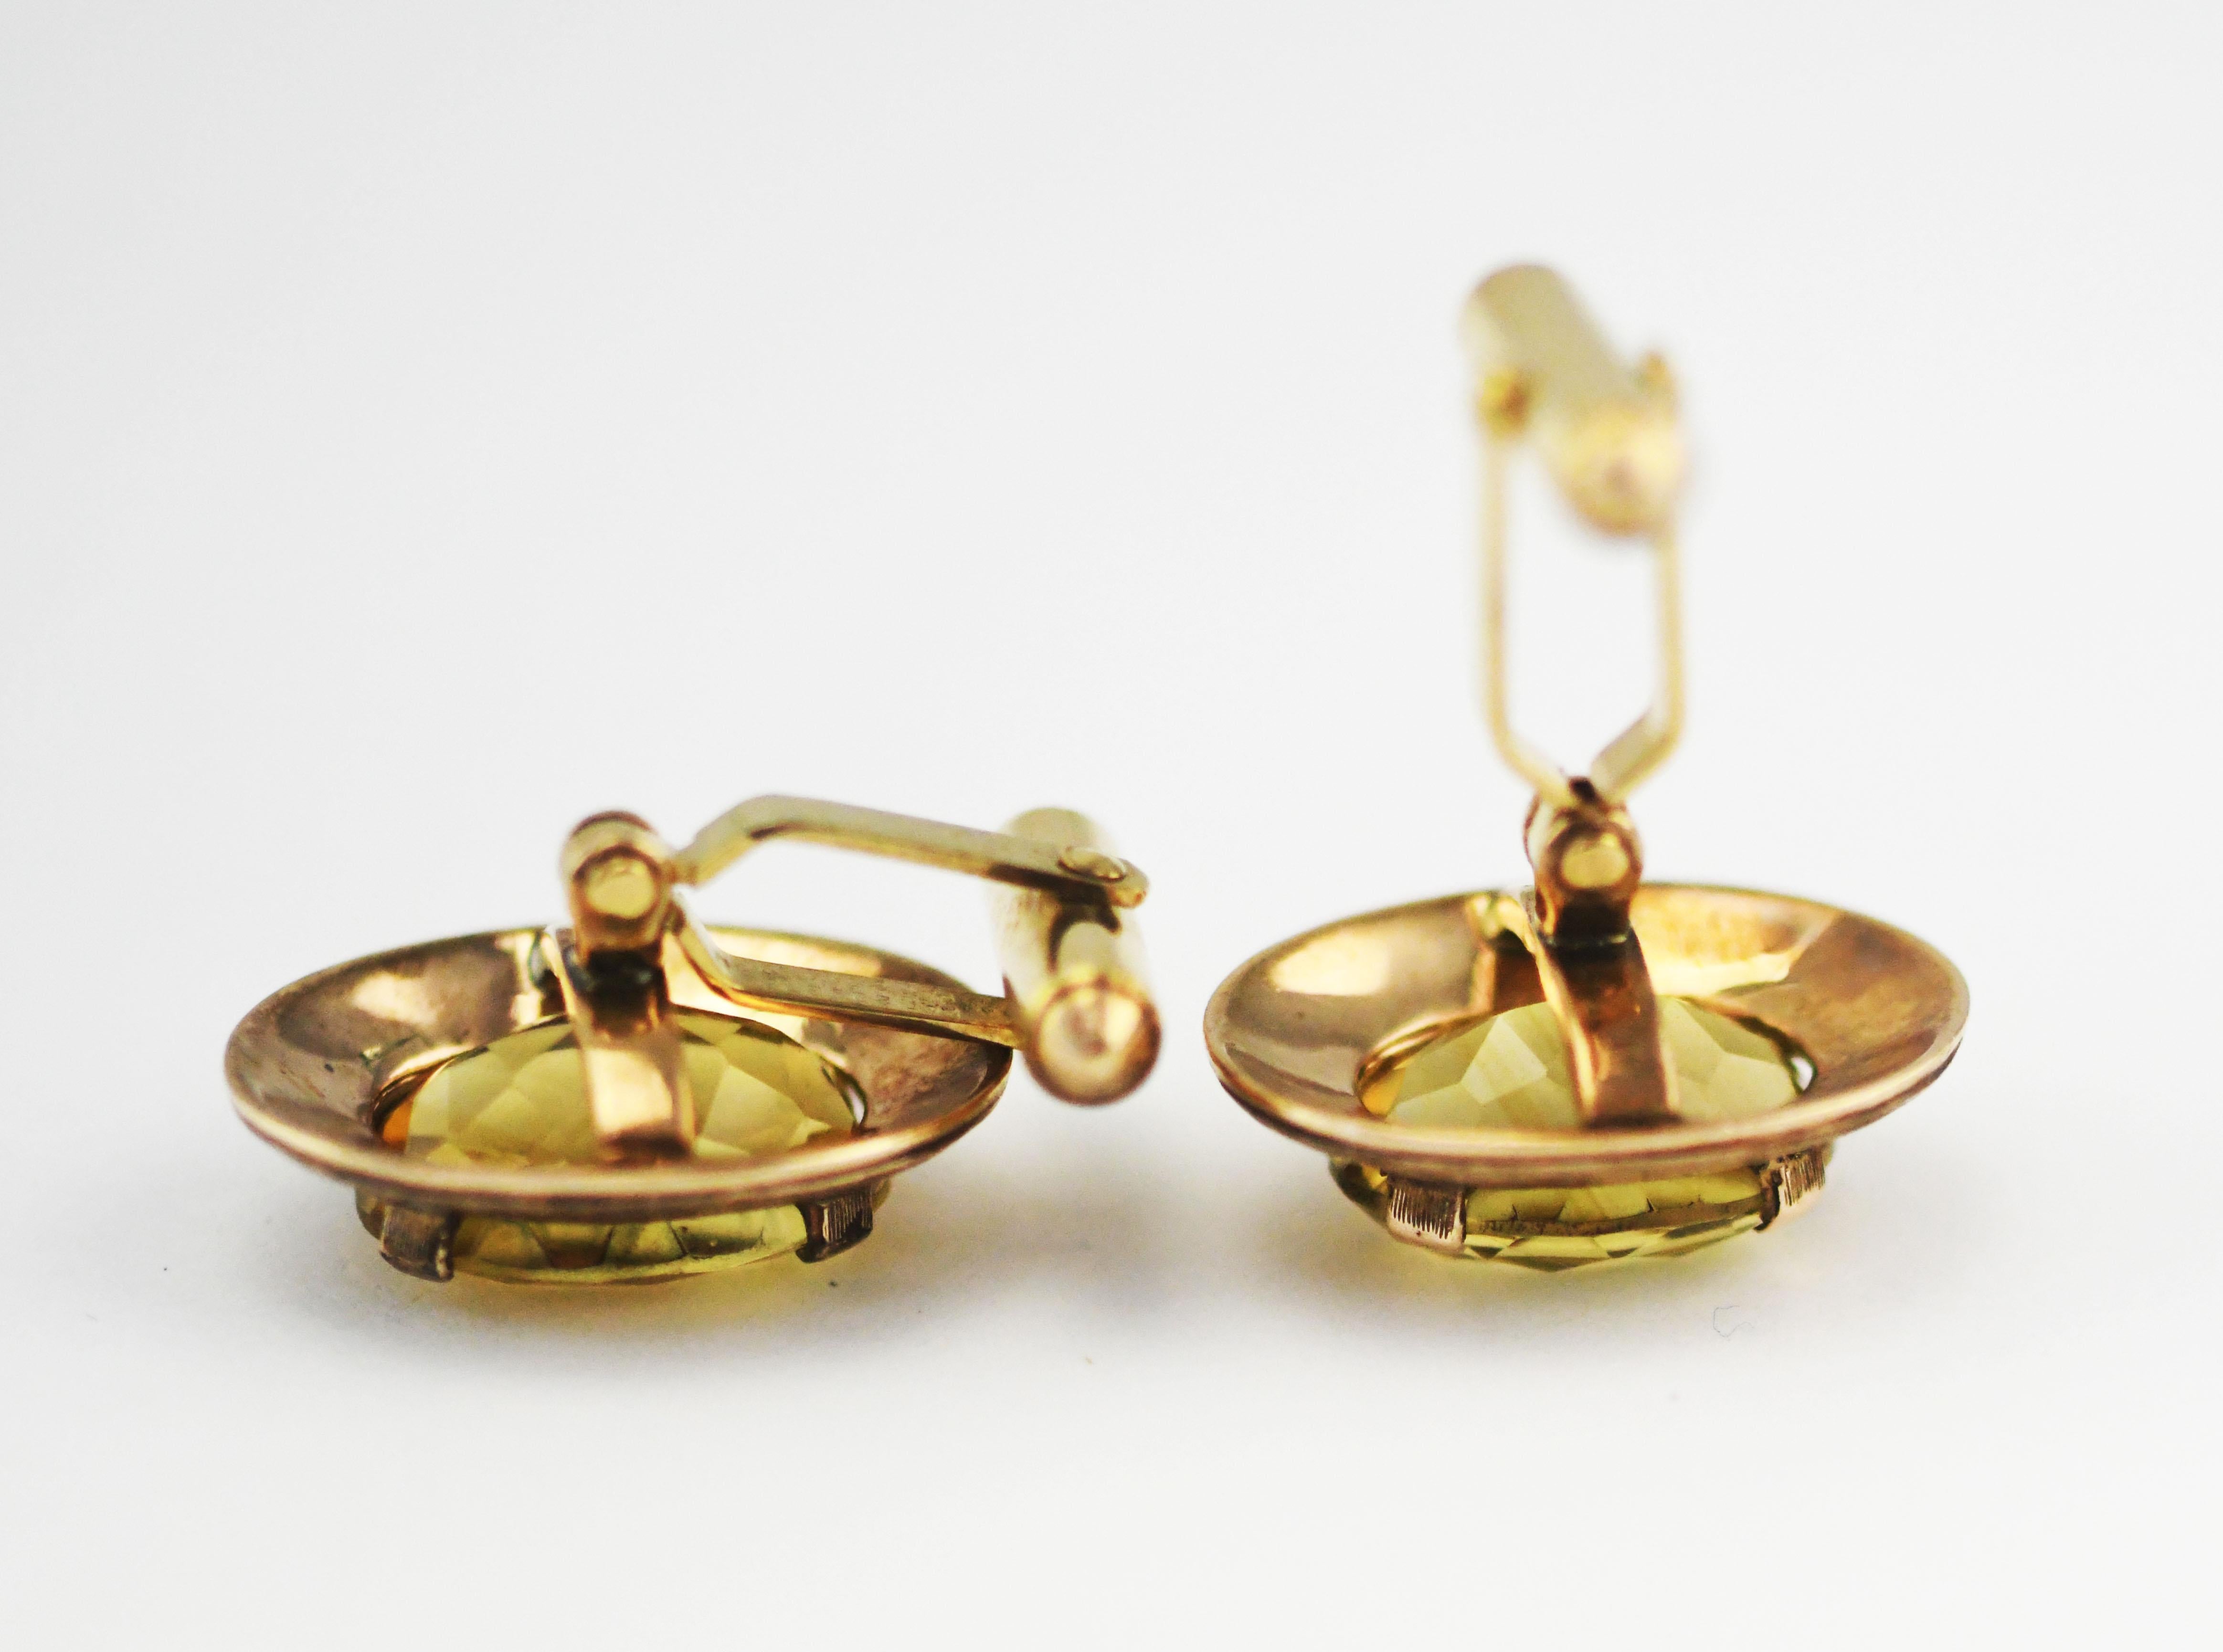 10 Karat Yellow Gold Cufflinks with Natural Yellow Citrine Stones 21mm wide x 16mm tall. it is 35mm from the front to the end of the toggle clasp. Wonderful clarity. The gold has a petina on the textured edge. Beautiful pieces are well built. 